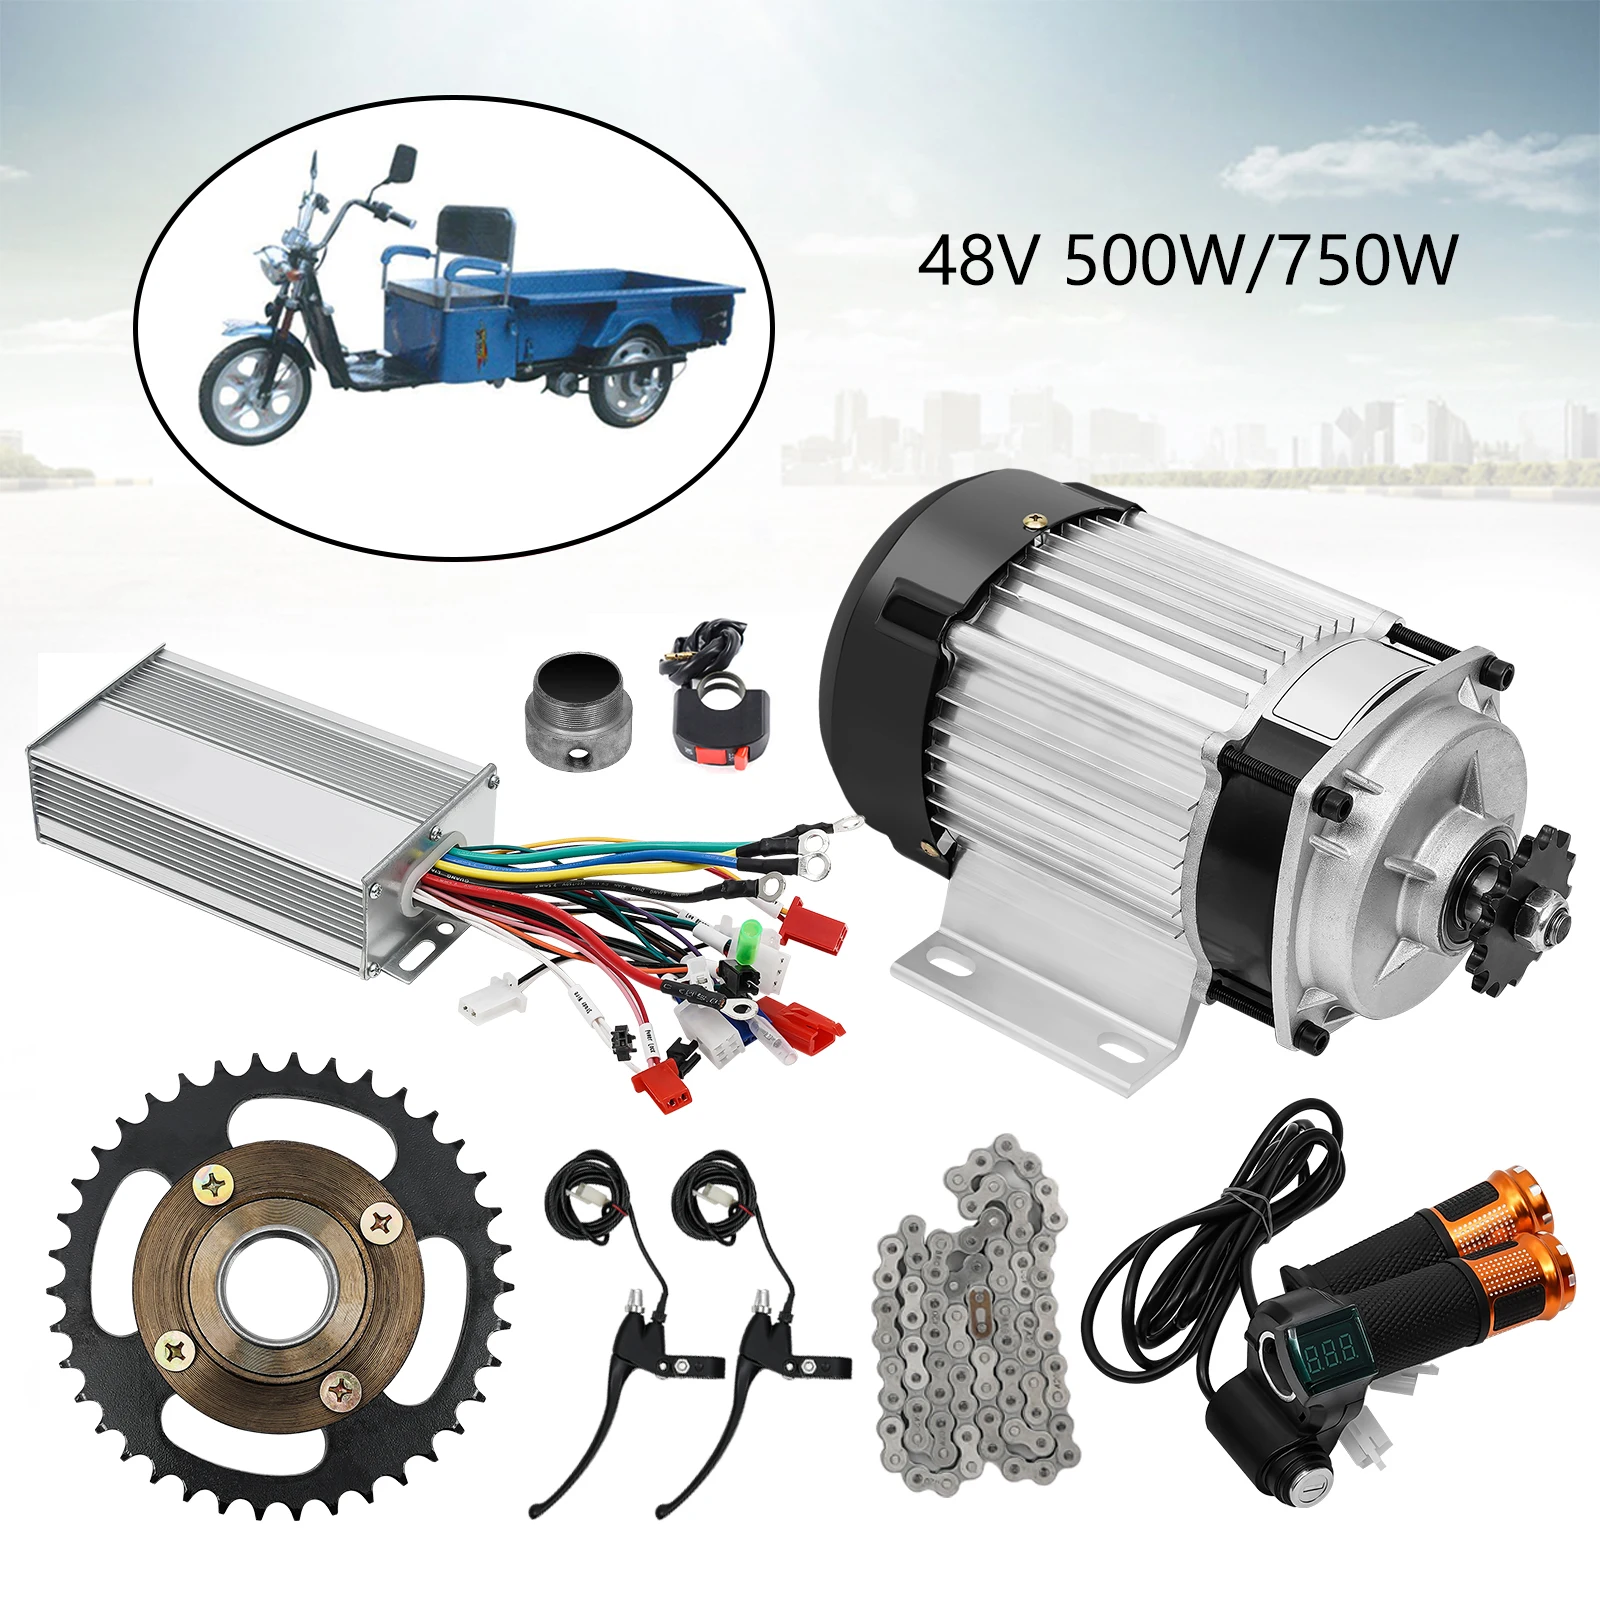 

500W/750W 48V Electric Brushless Geared Motor Kits for Electric Motorized Tricycle Rickshaw Bike